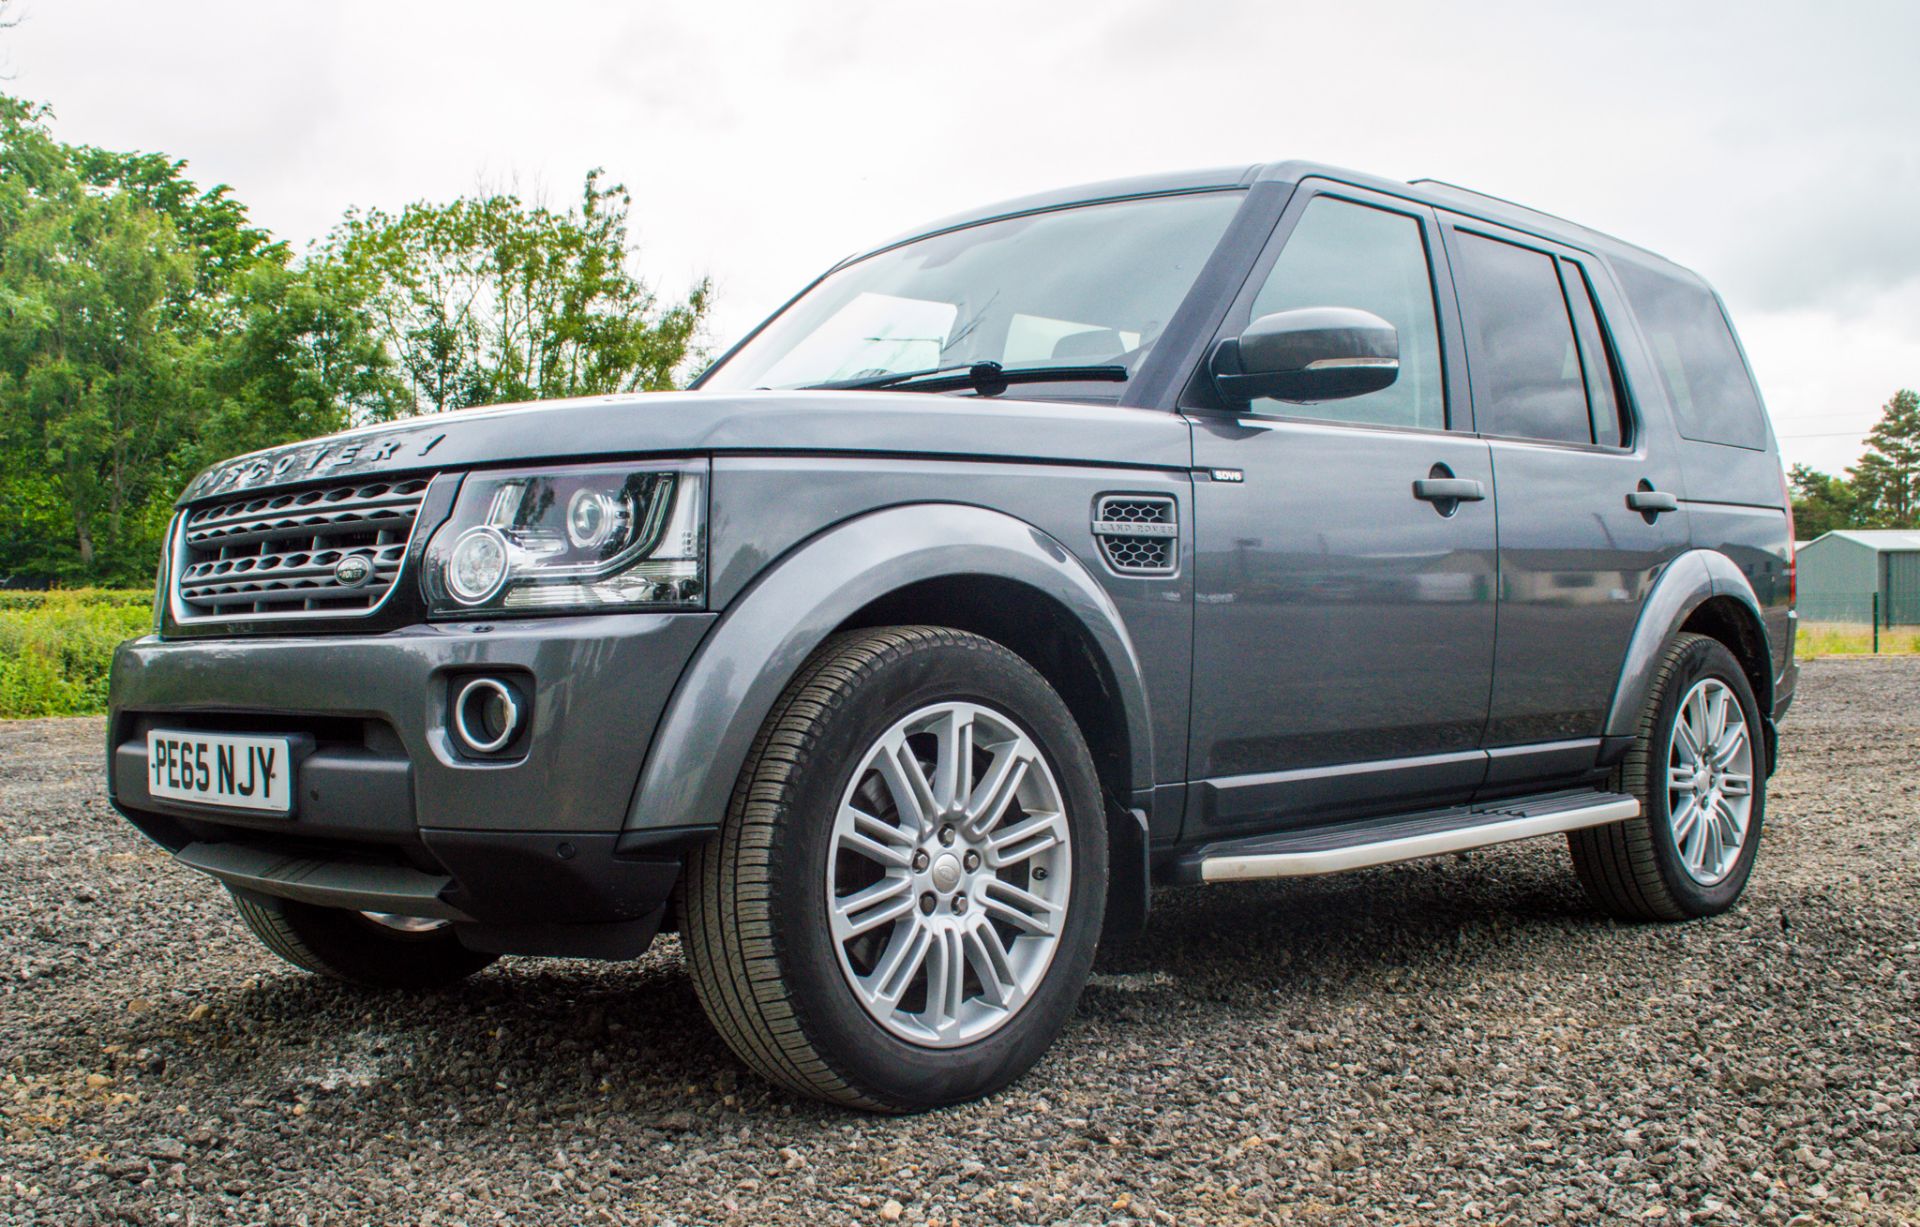 Land Rover Discovery 4 SE 3.0 TDV6 Commercial 4 wheel drive utility vehicle  Reg No: PE 65 NJY  Date